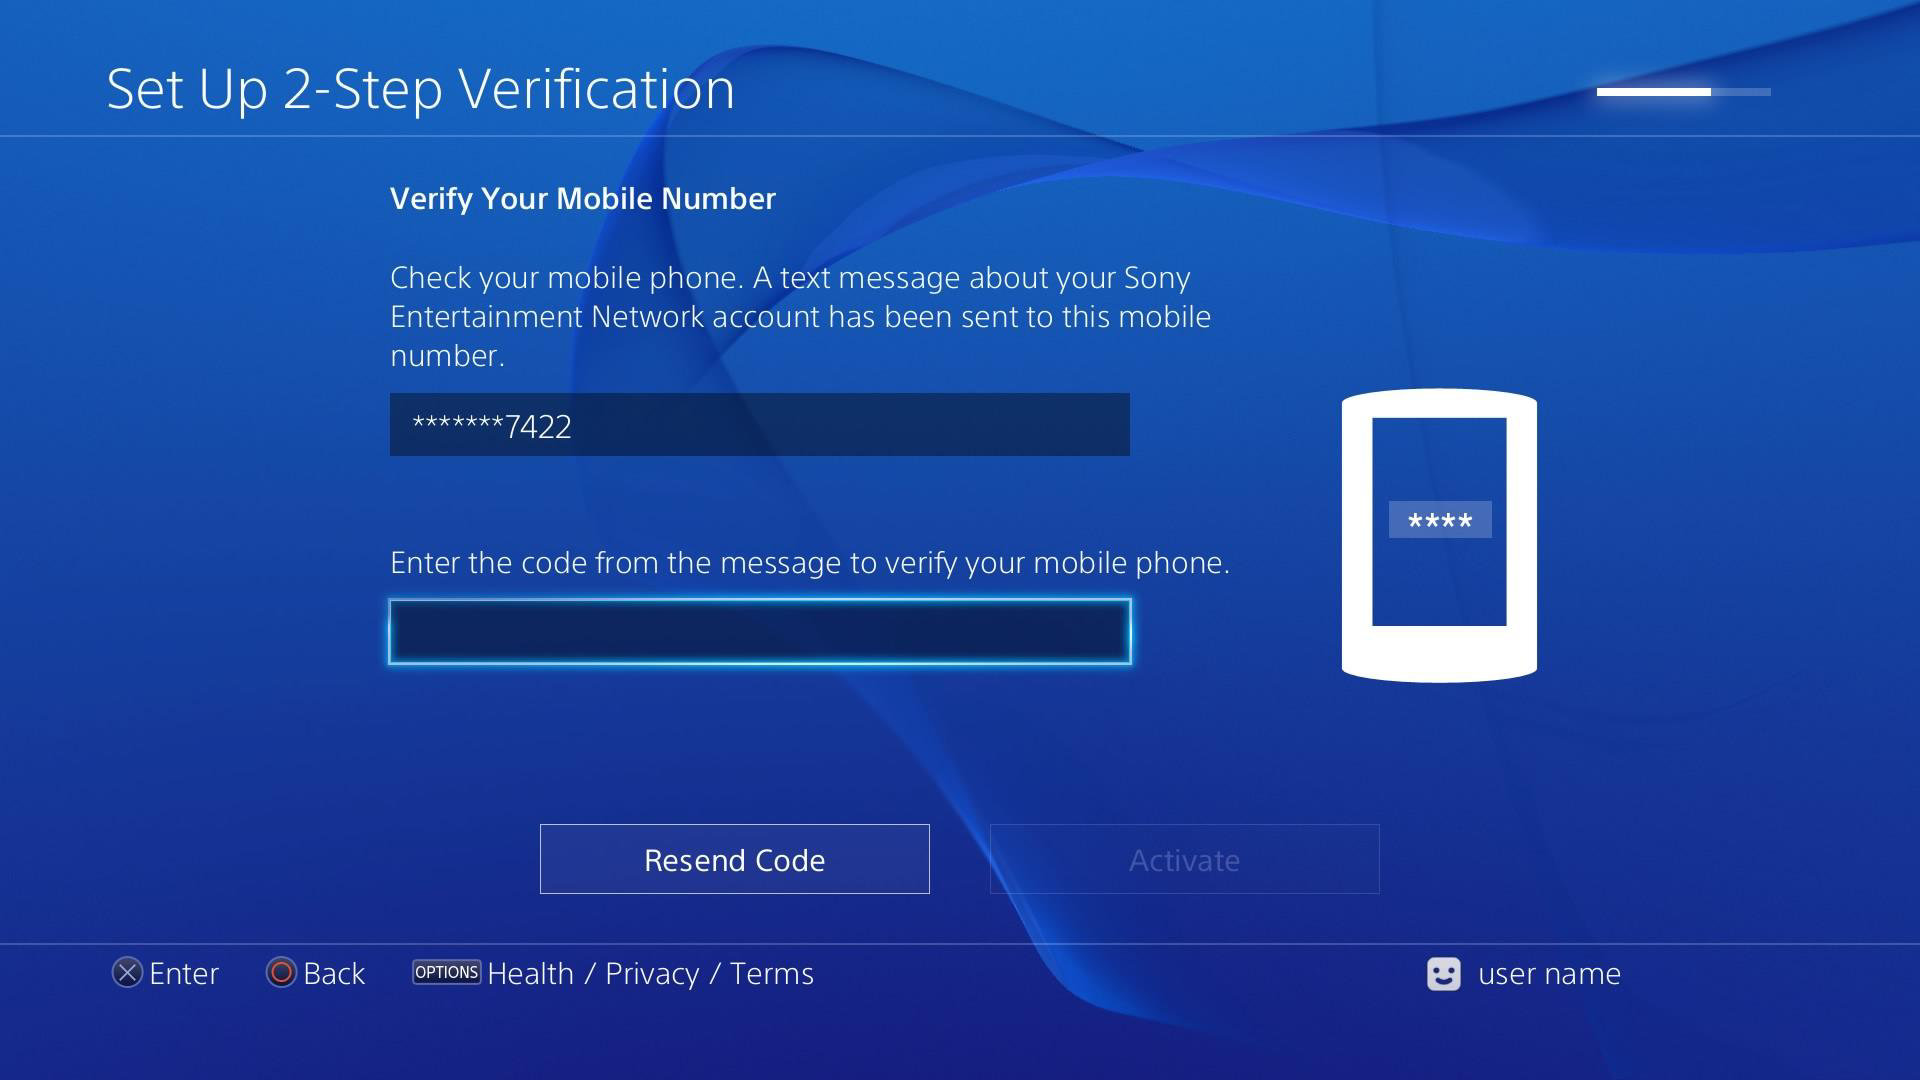 How to Secure your PlayStation Network (PSN) Account